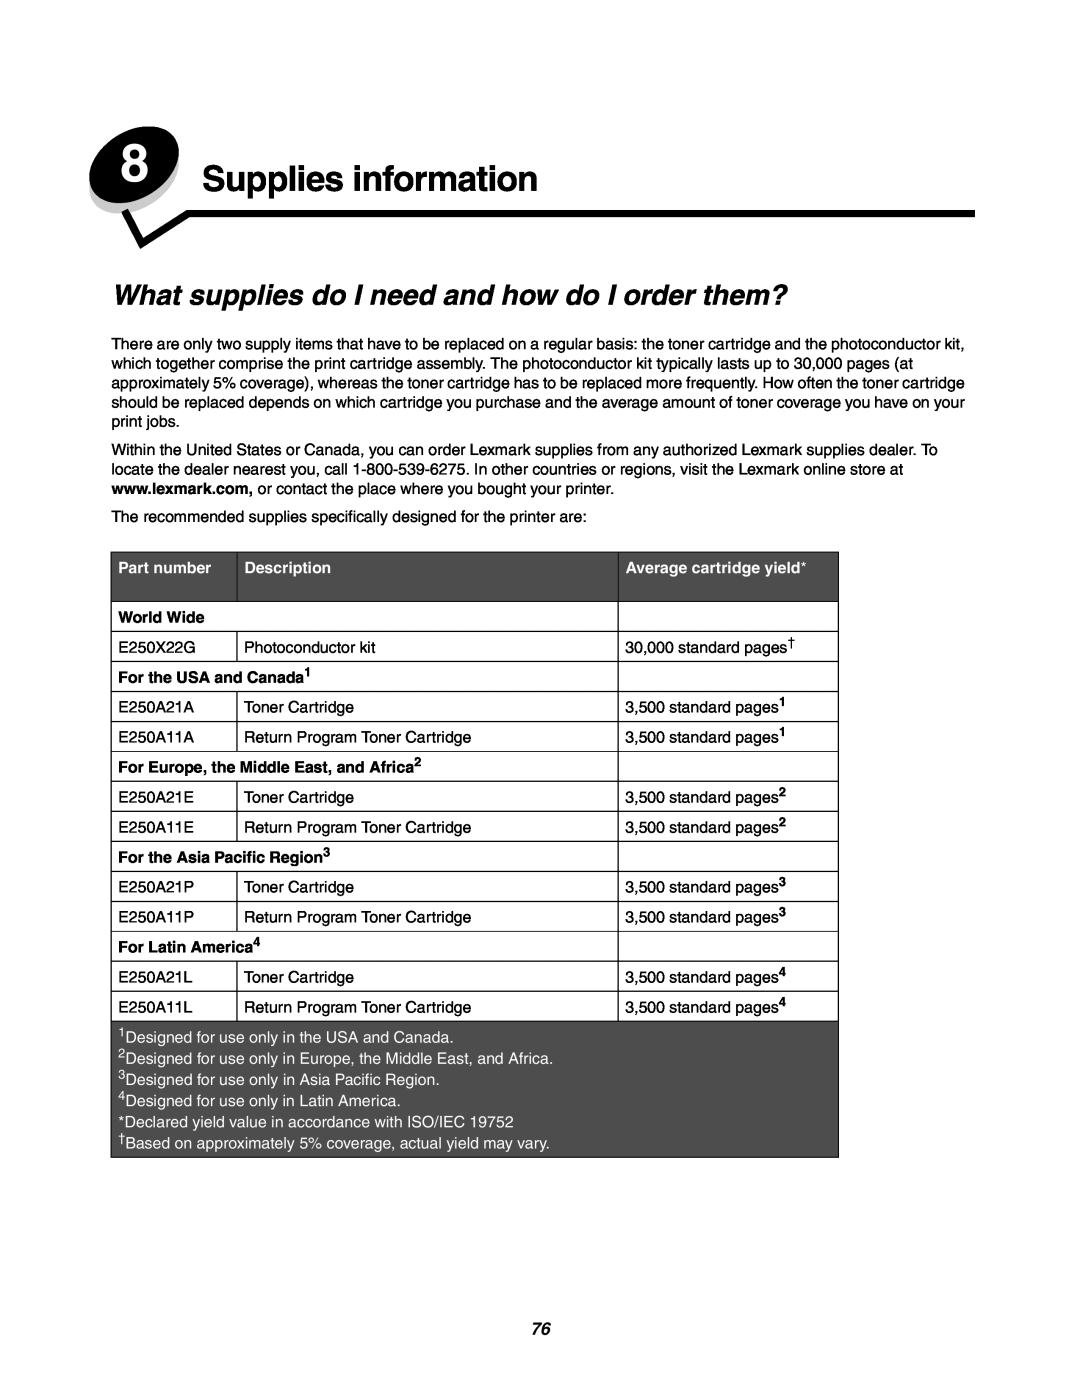 Lexmark 250dn Supplies information, What supplies do I need and how do I order them?, Part number, Description, World Wide 